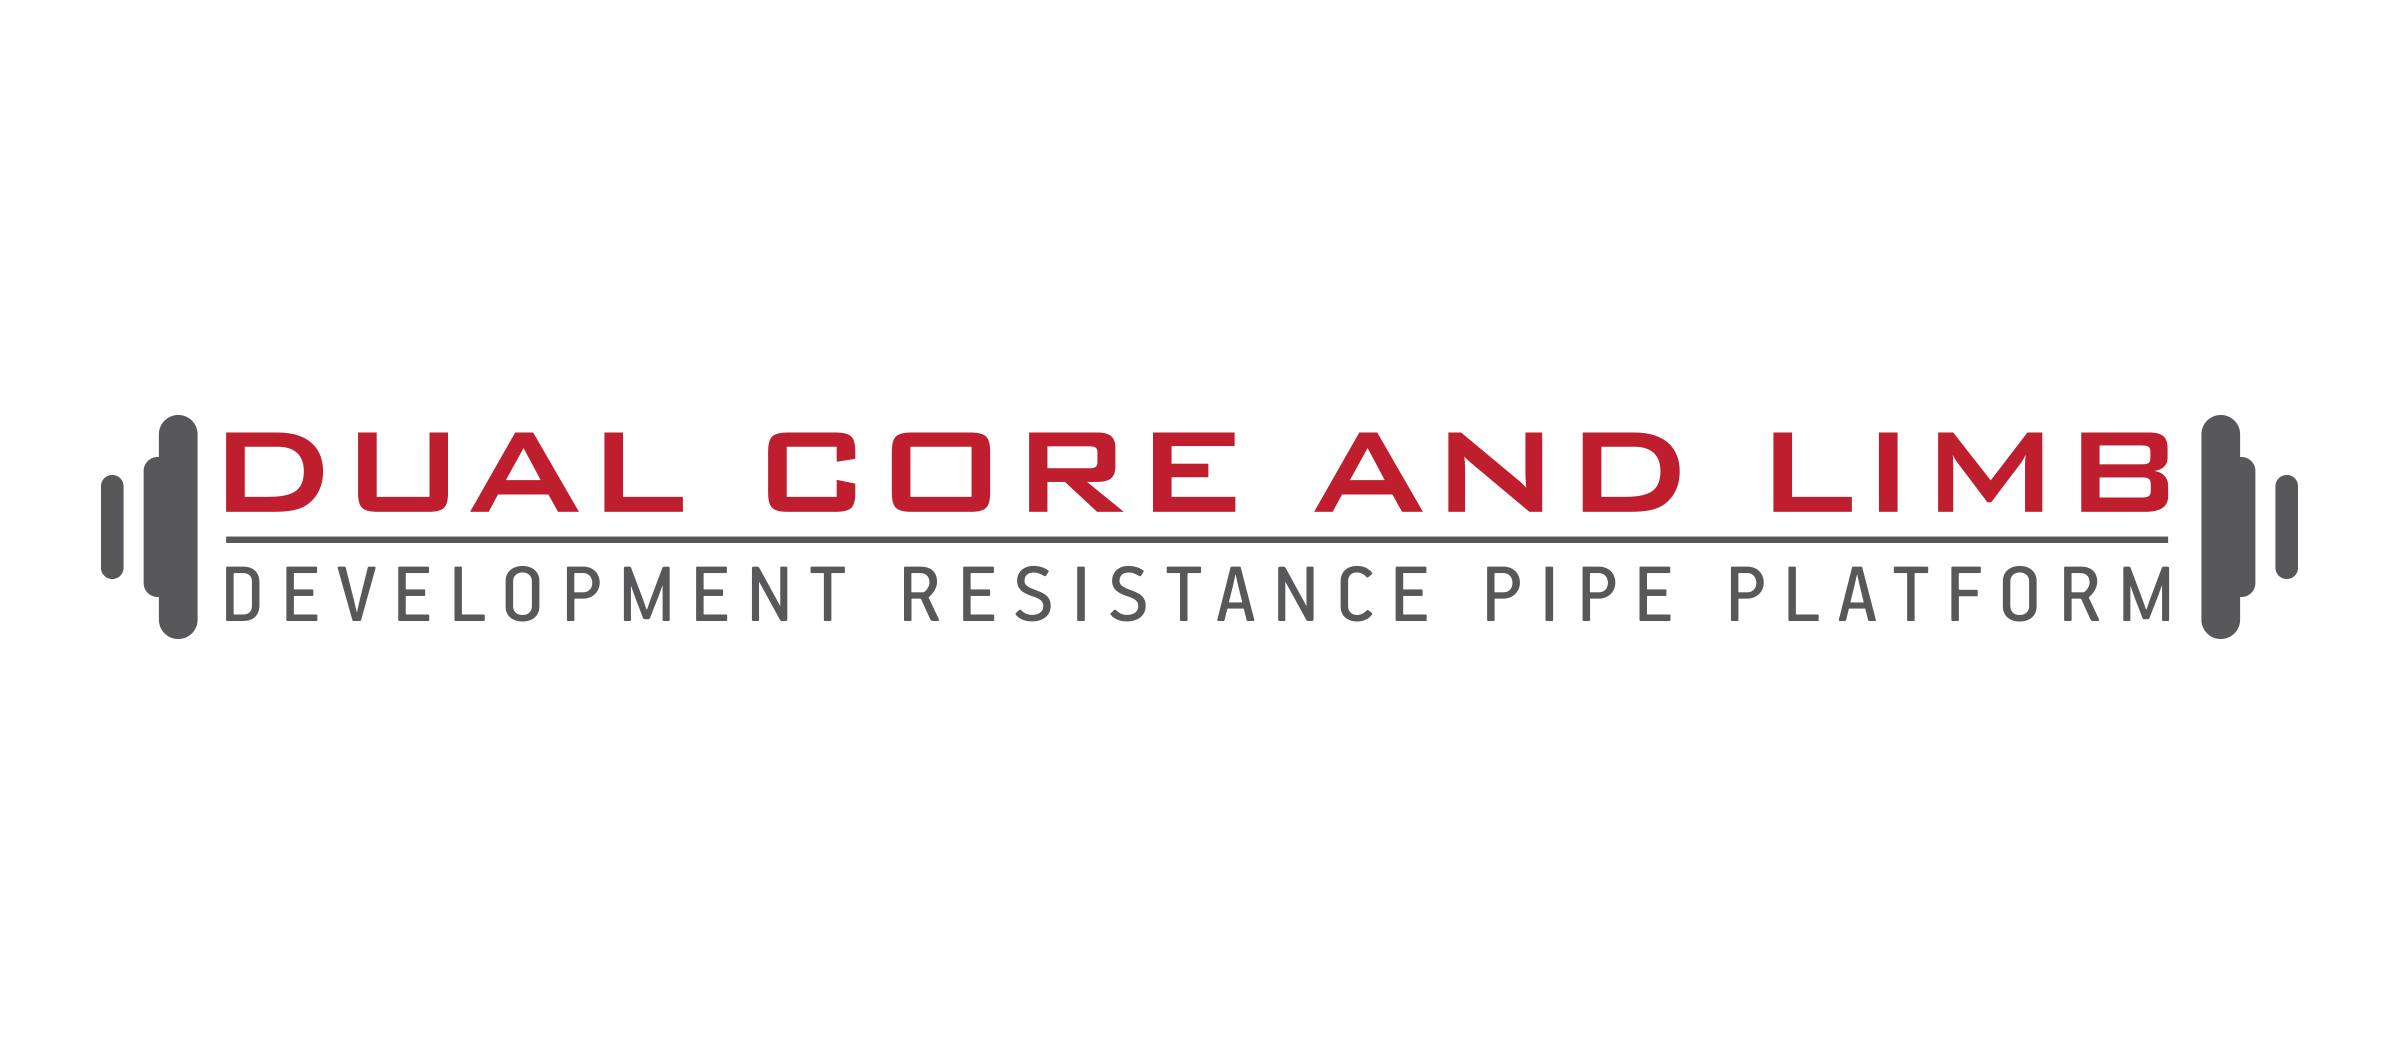 The Dual Core and Limb Development Resistance Pipe is able to improve a person’s strength, agility and flexibility.